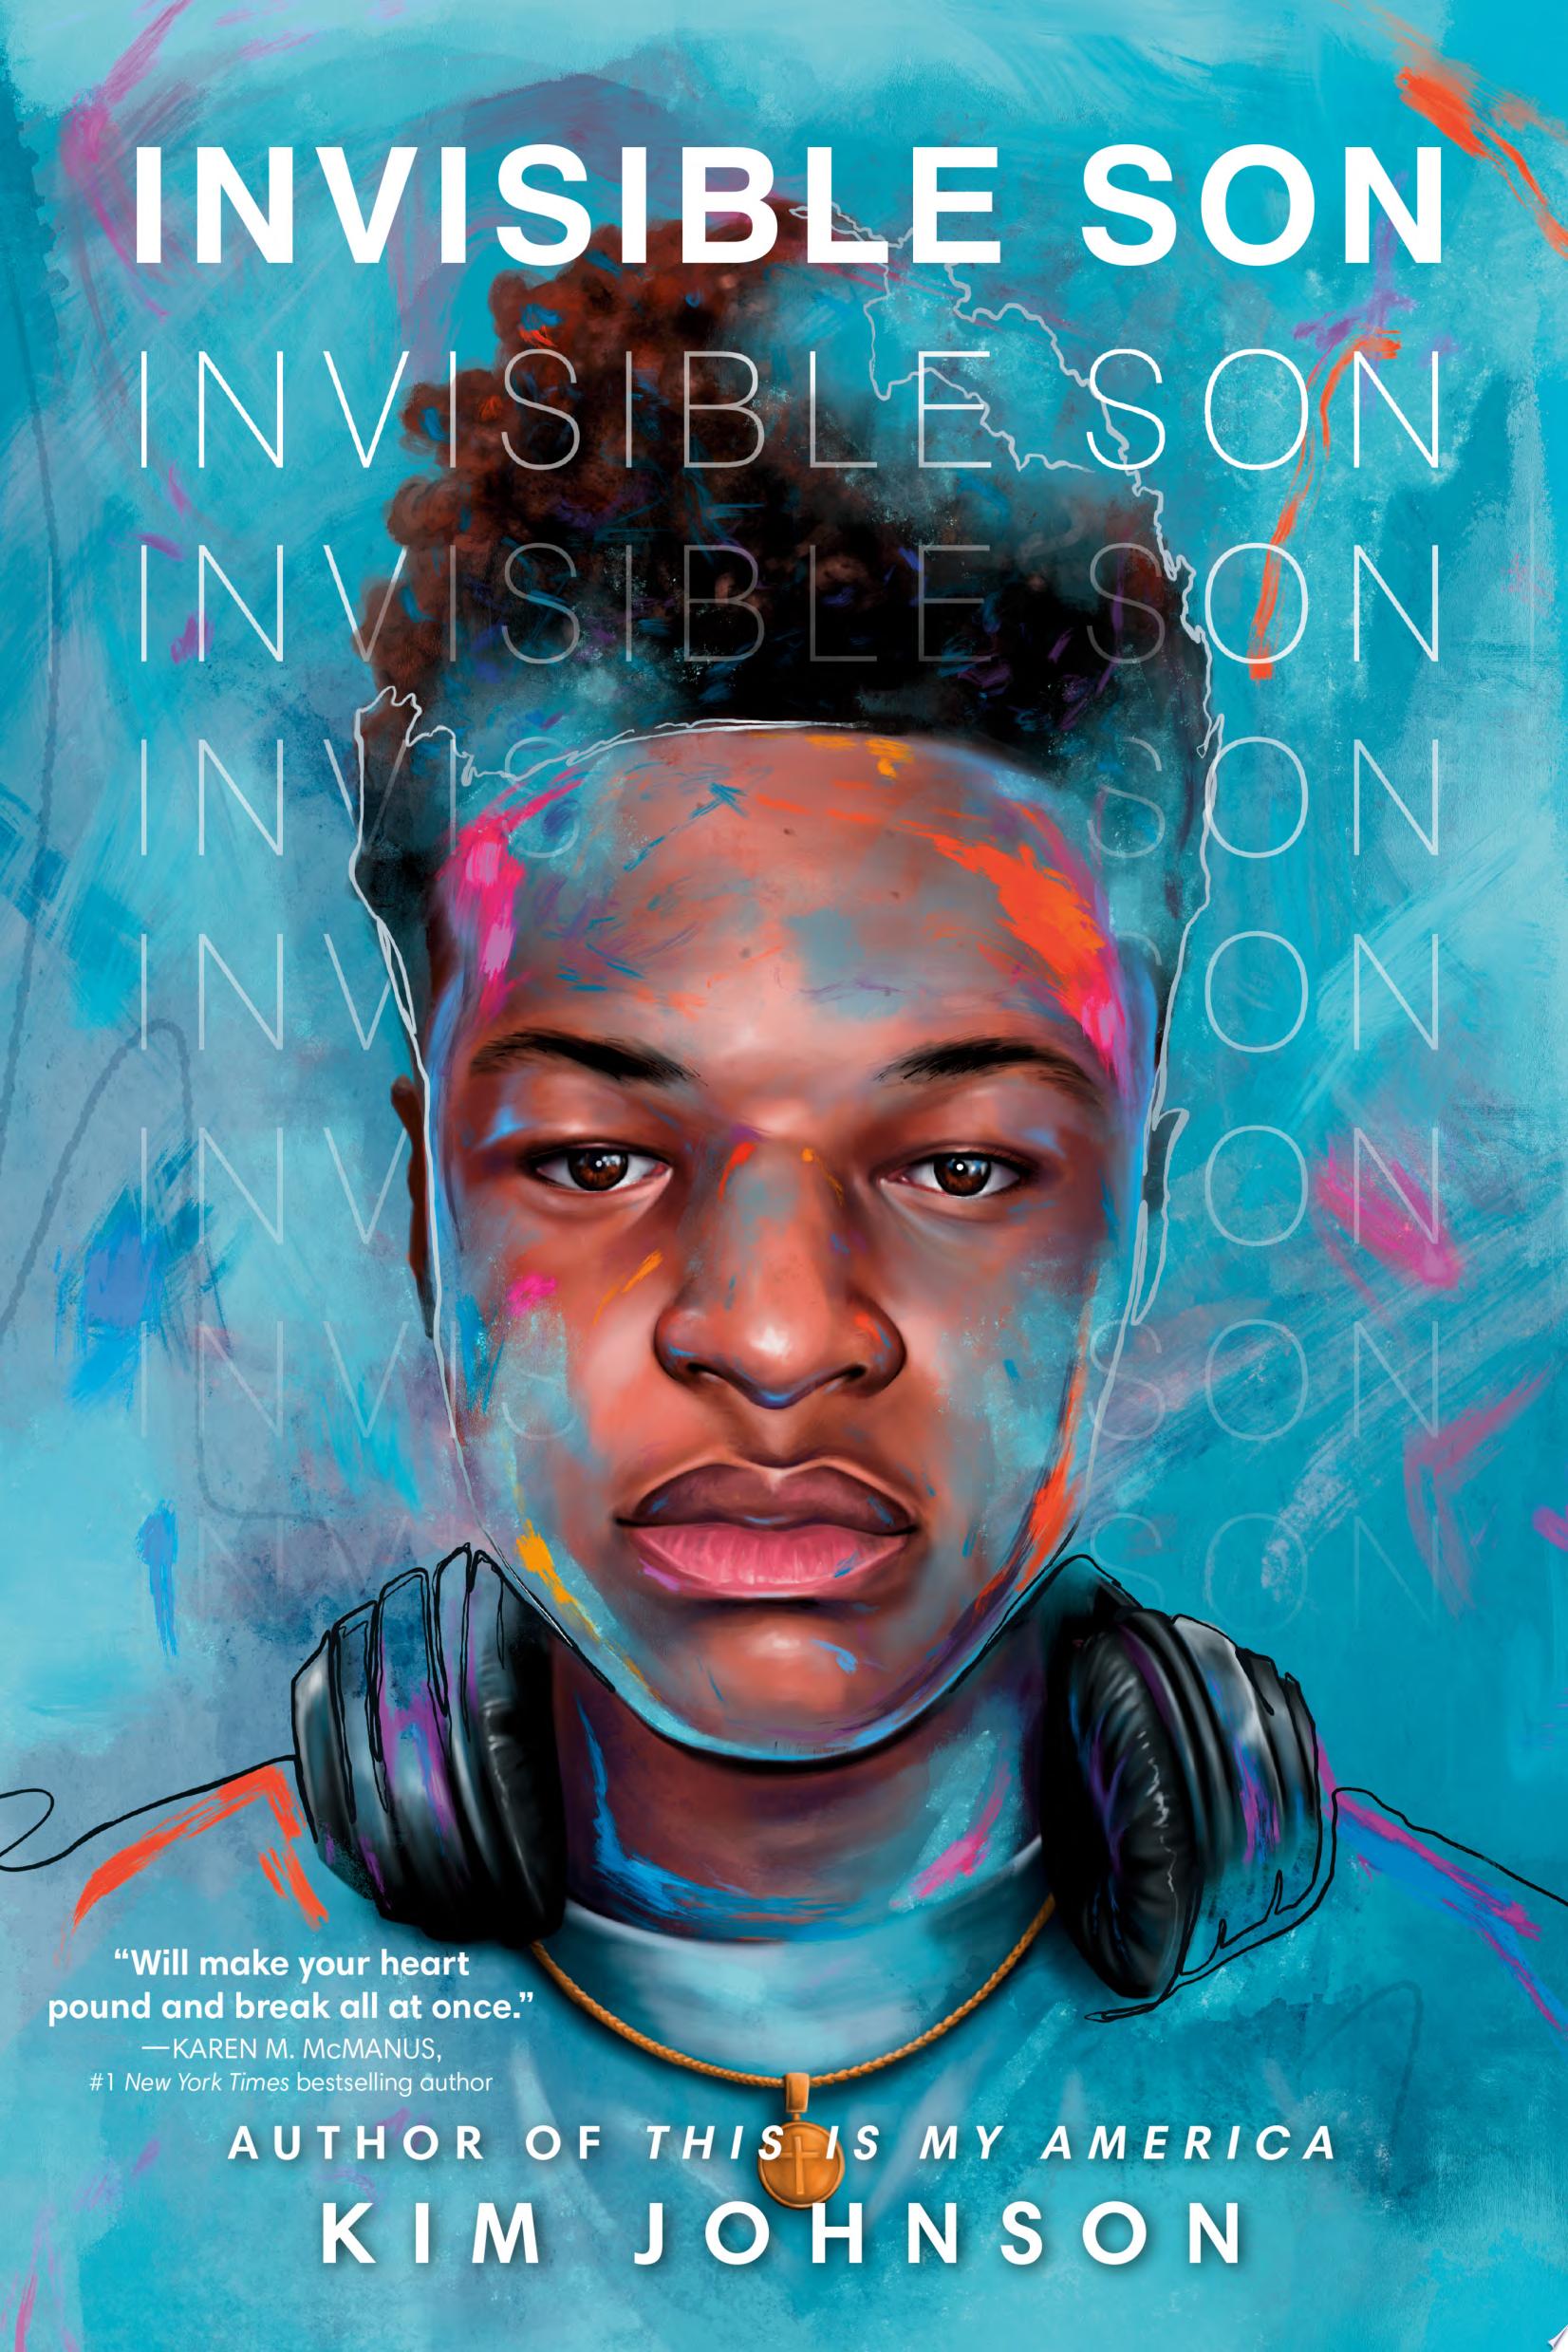 Image for "Invisible Son"